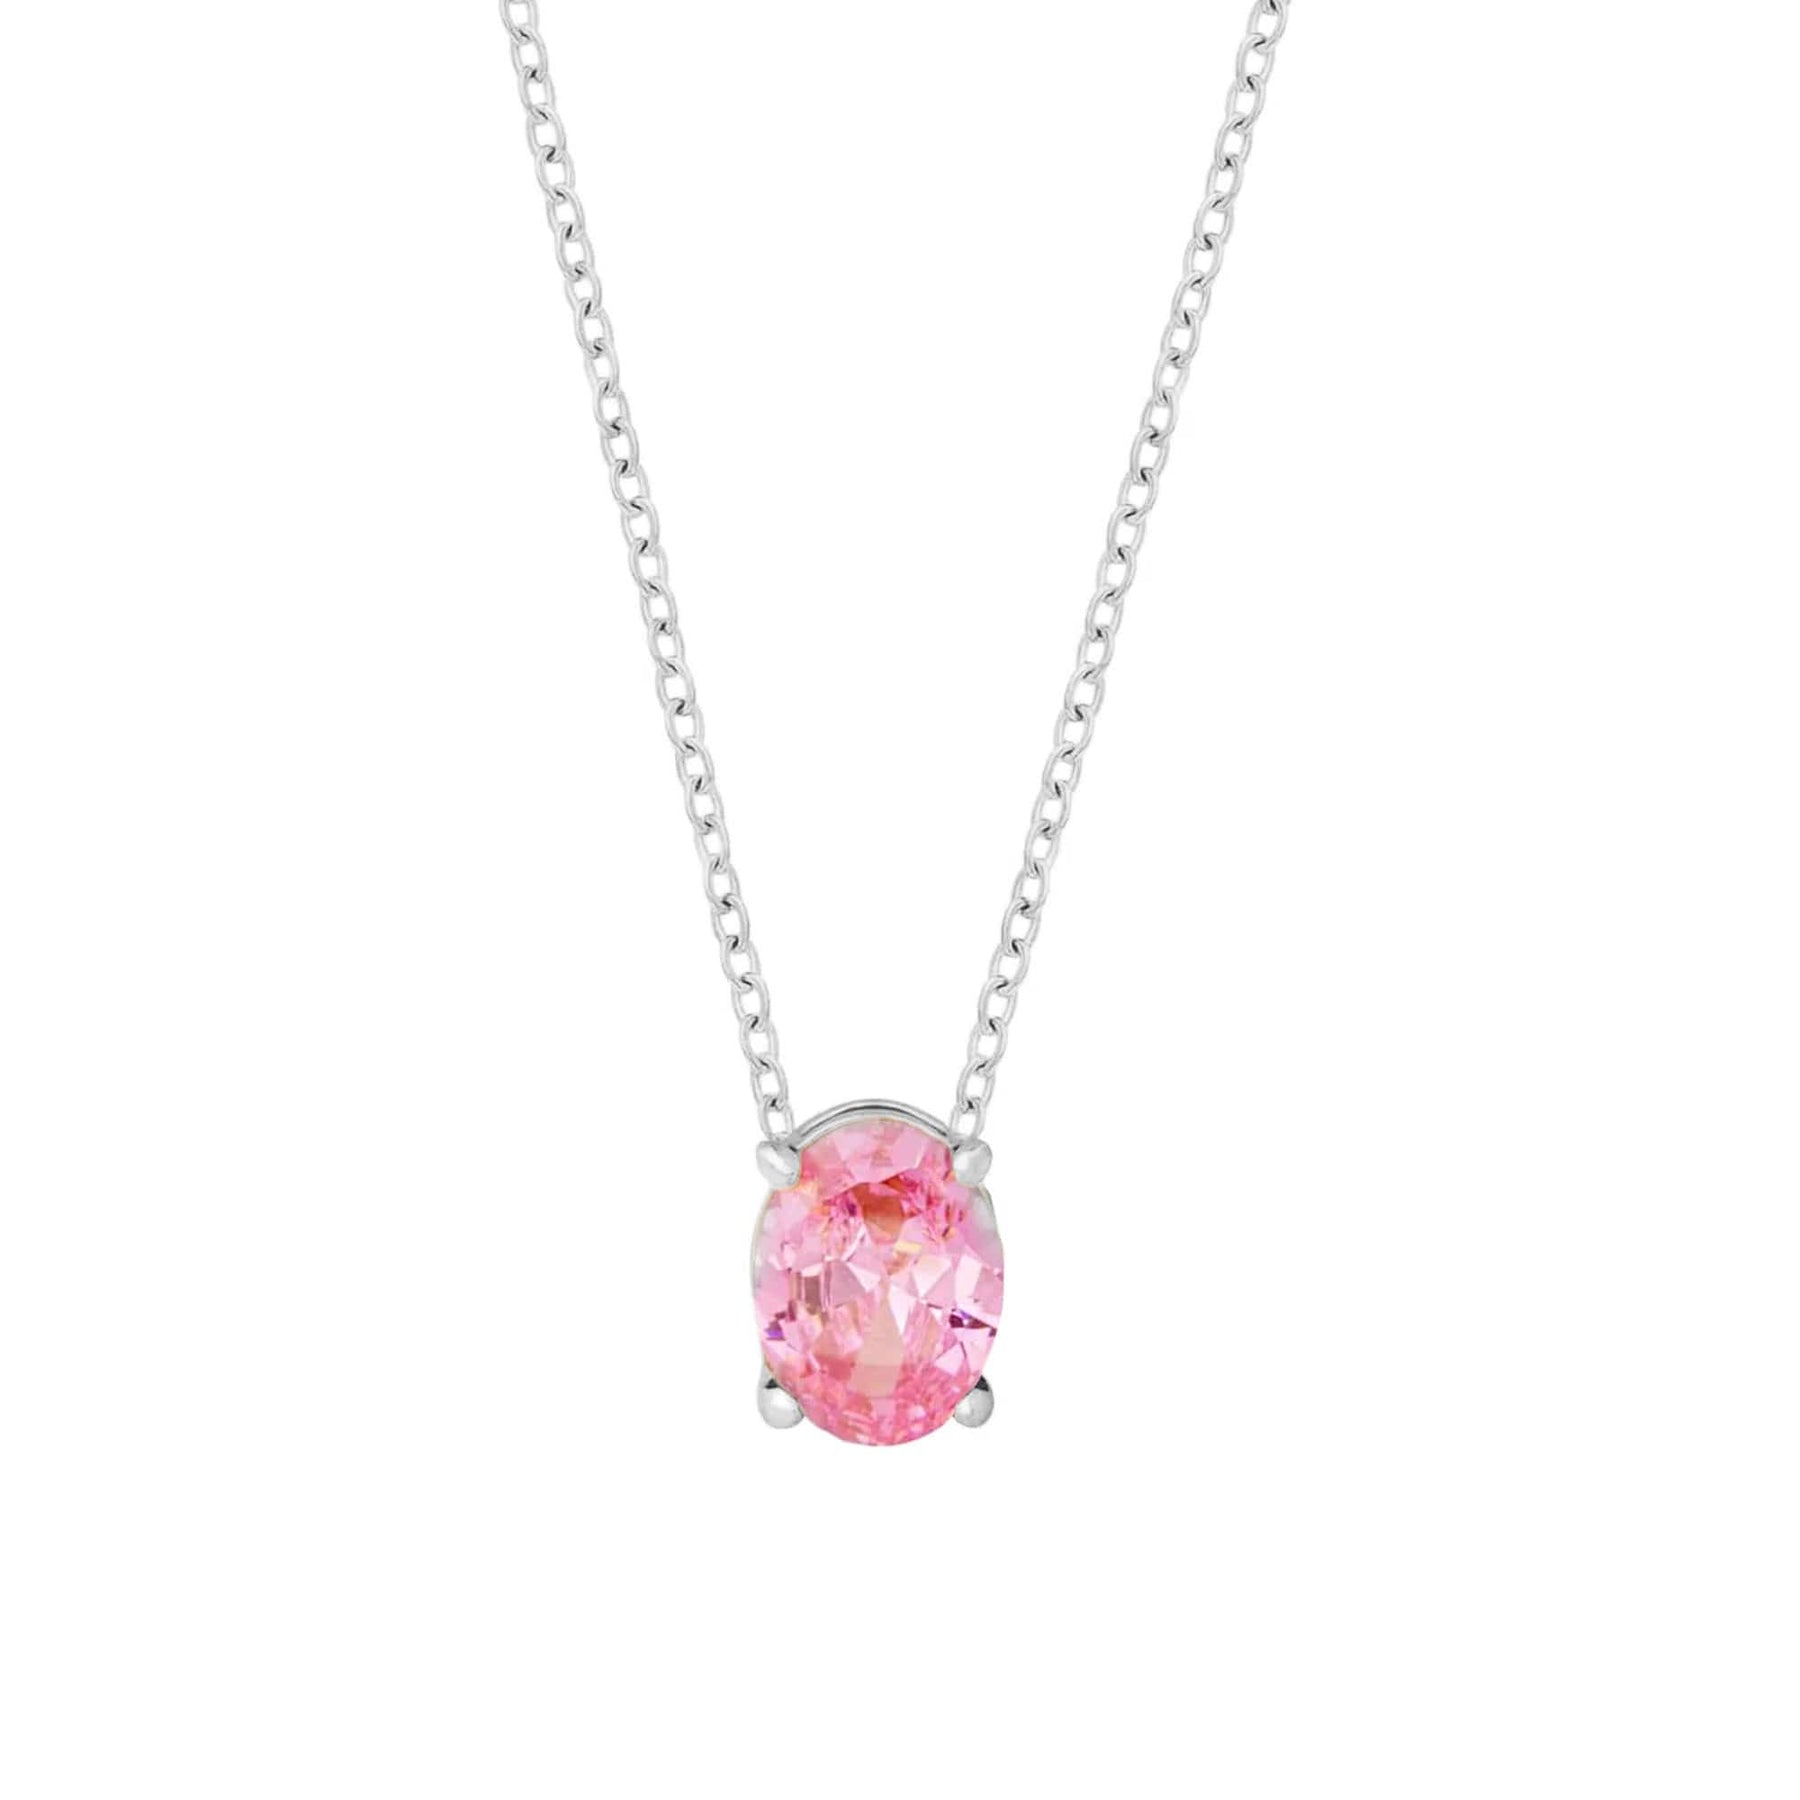 BohoMoon Stainless Steel Maia Necklace Silver / Pink